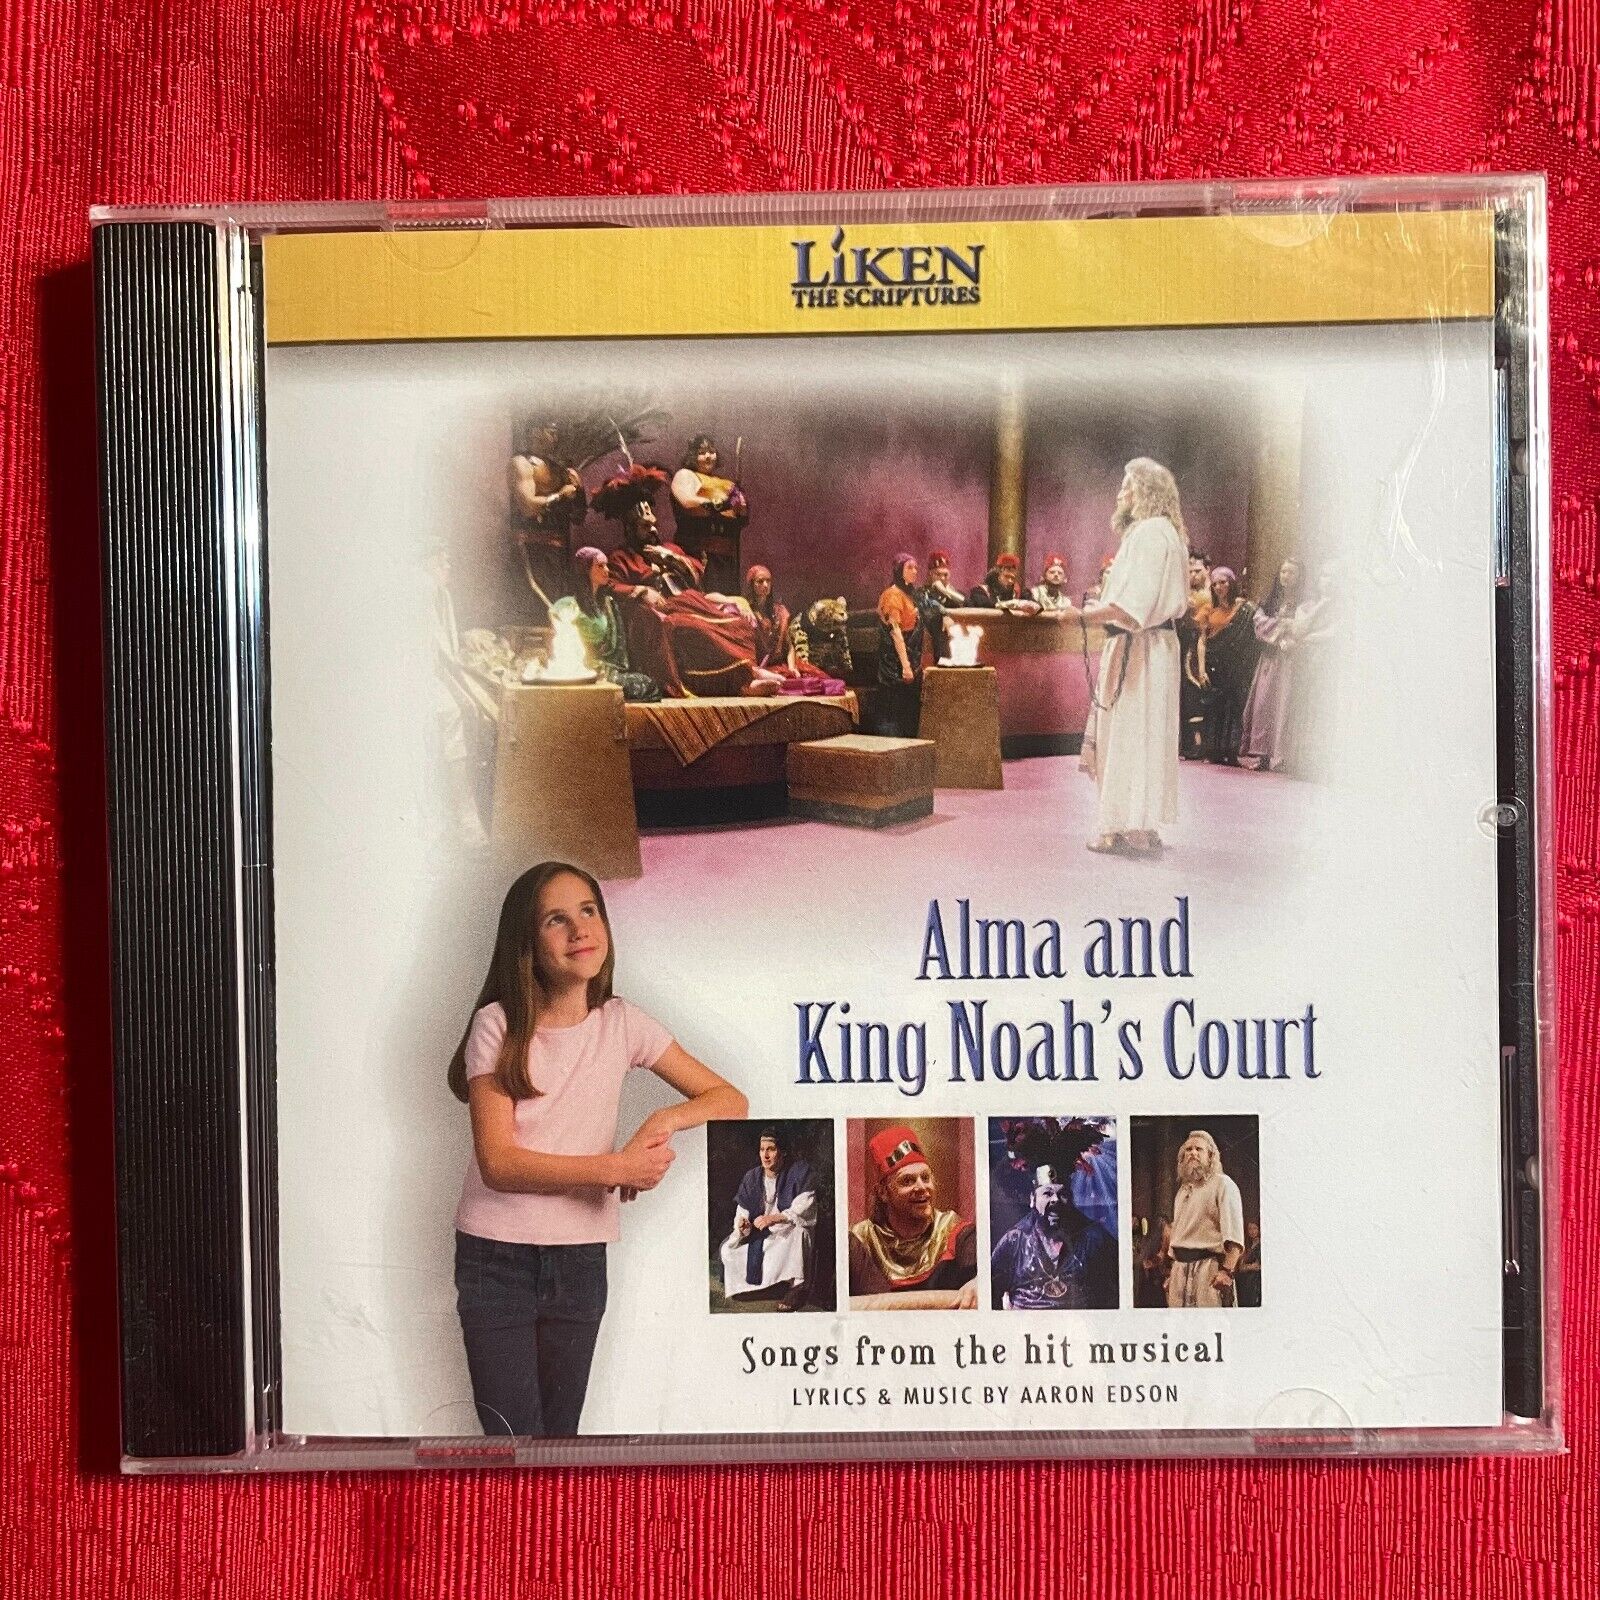 ALMA AND KING NOAH'S COURT: SONGS FROM THE HIT MUSICAL CD Liken the Scriptures